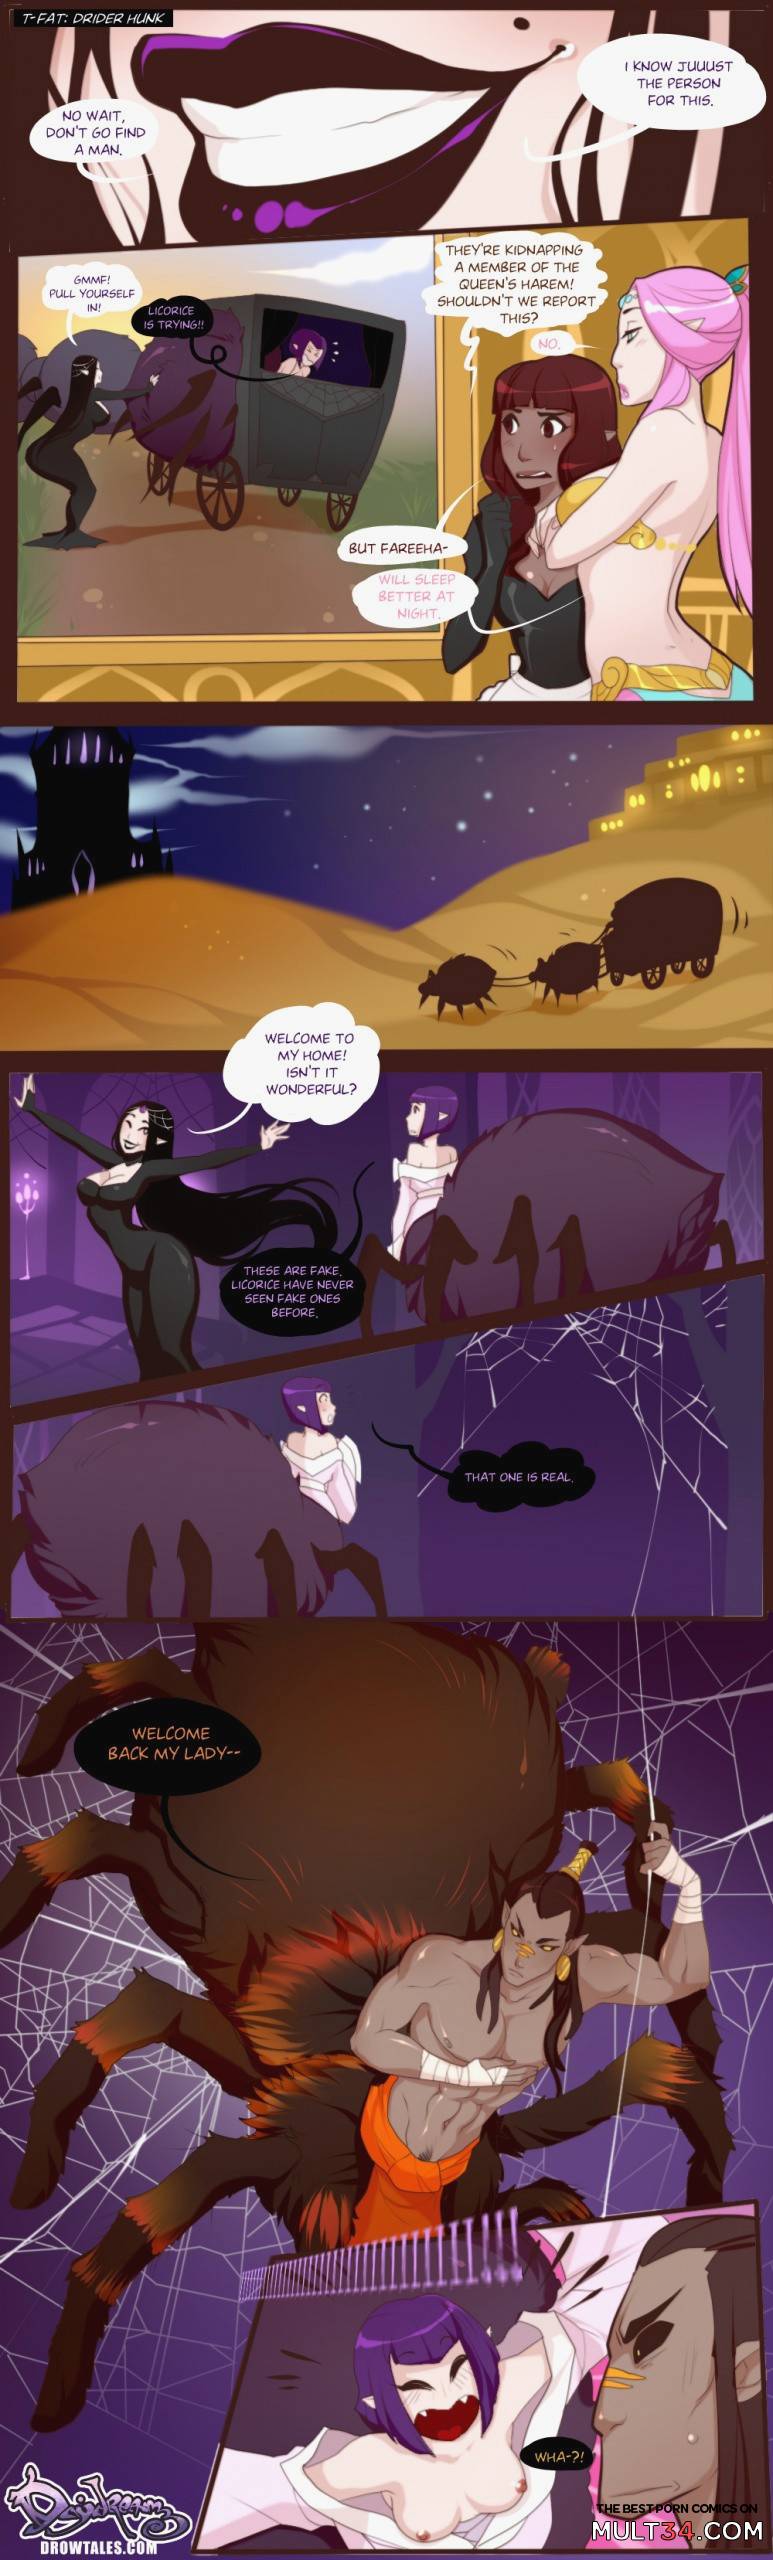 Queen of Butts page 75